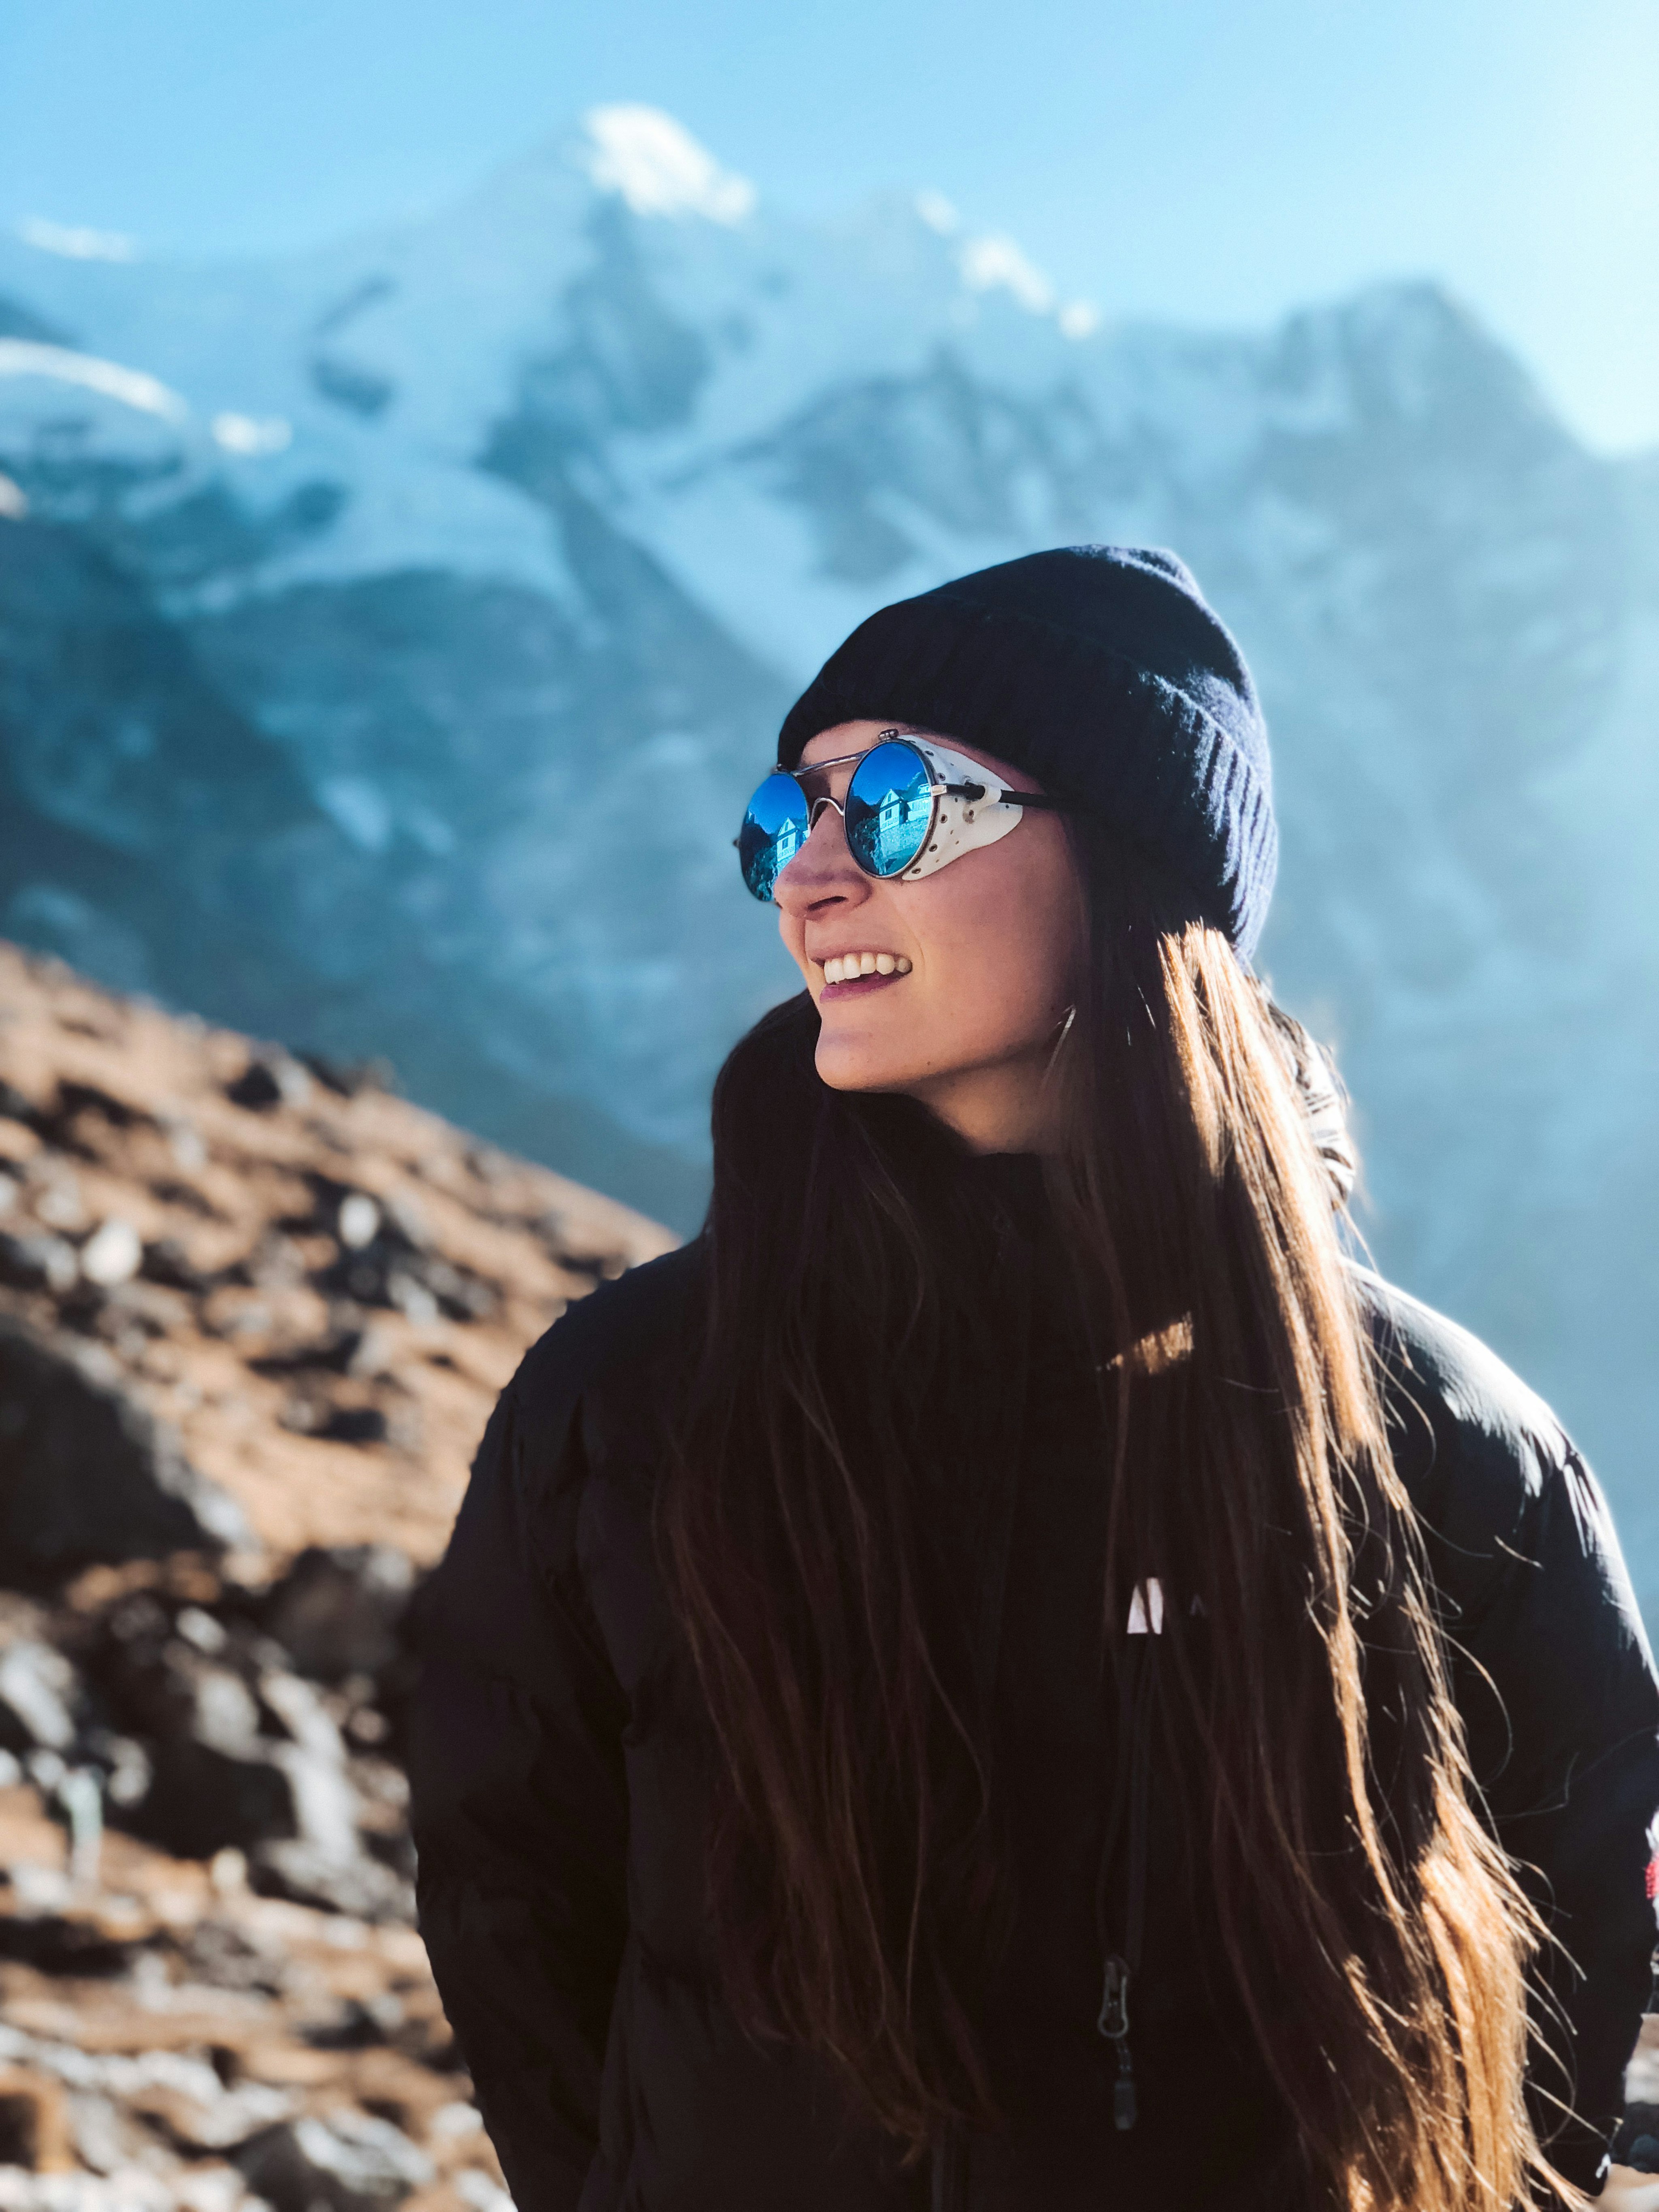 An Interview with Mountaineer Olivia Jane Wood